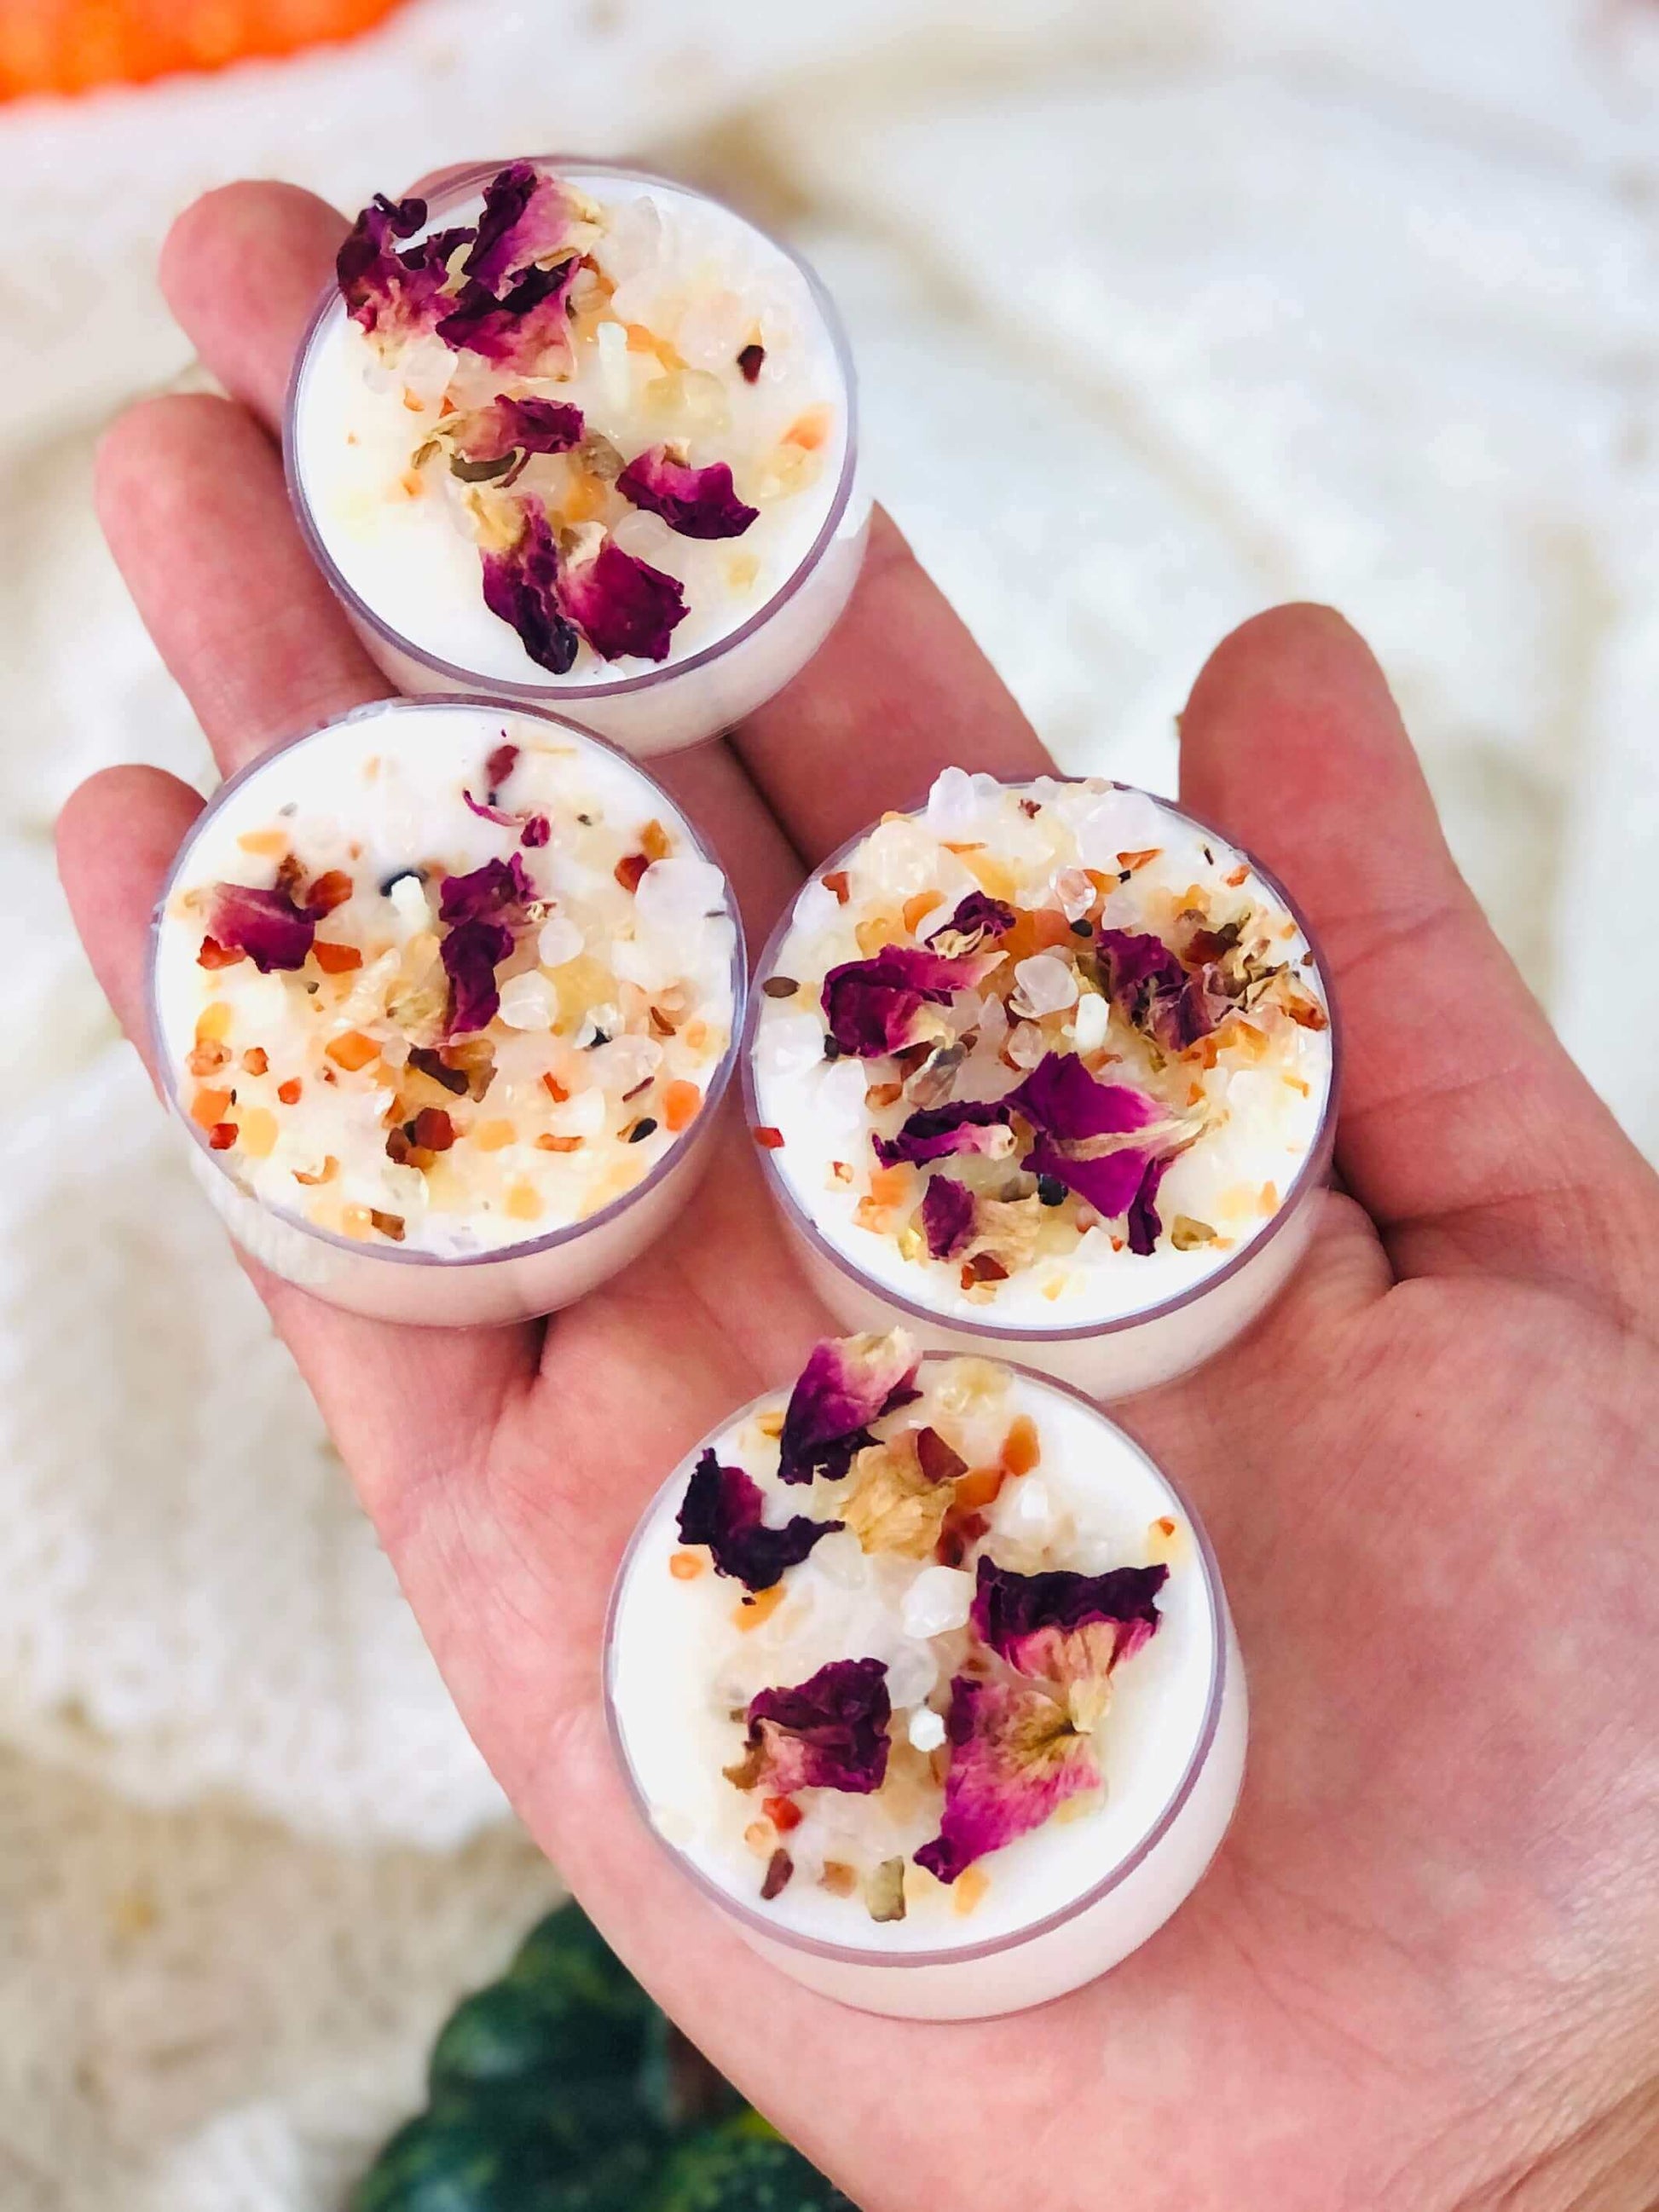 NEW - Self Love scented tea lights with crystals